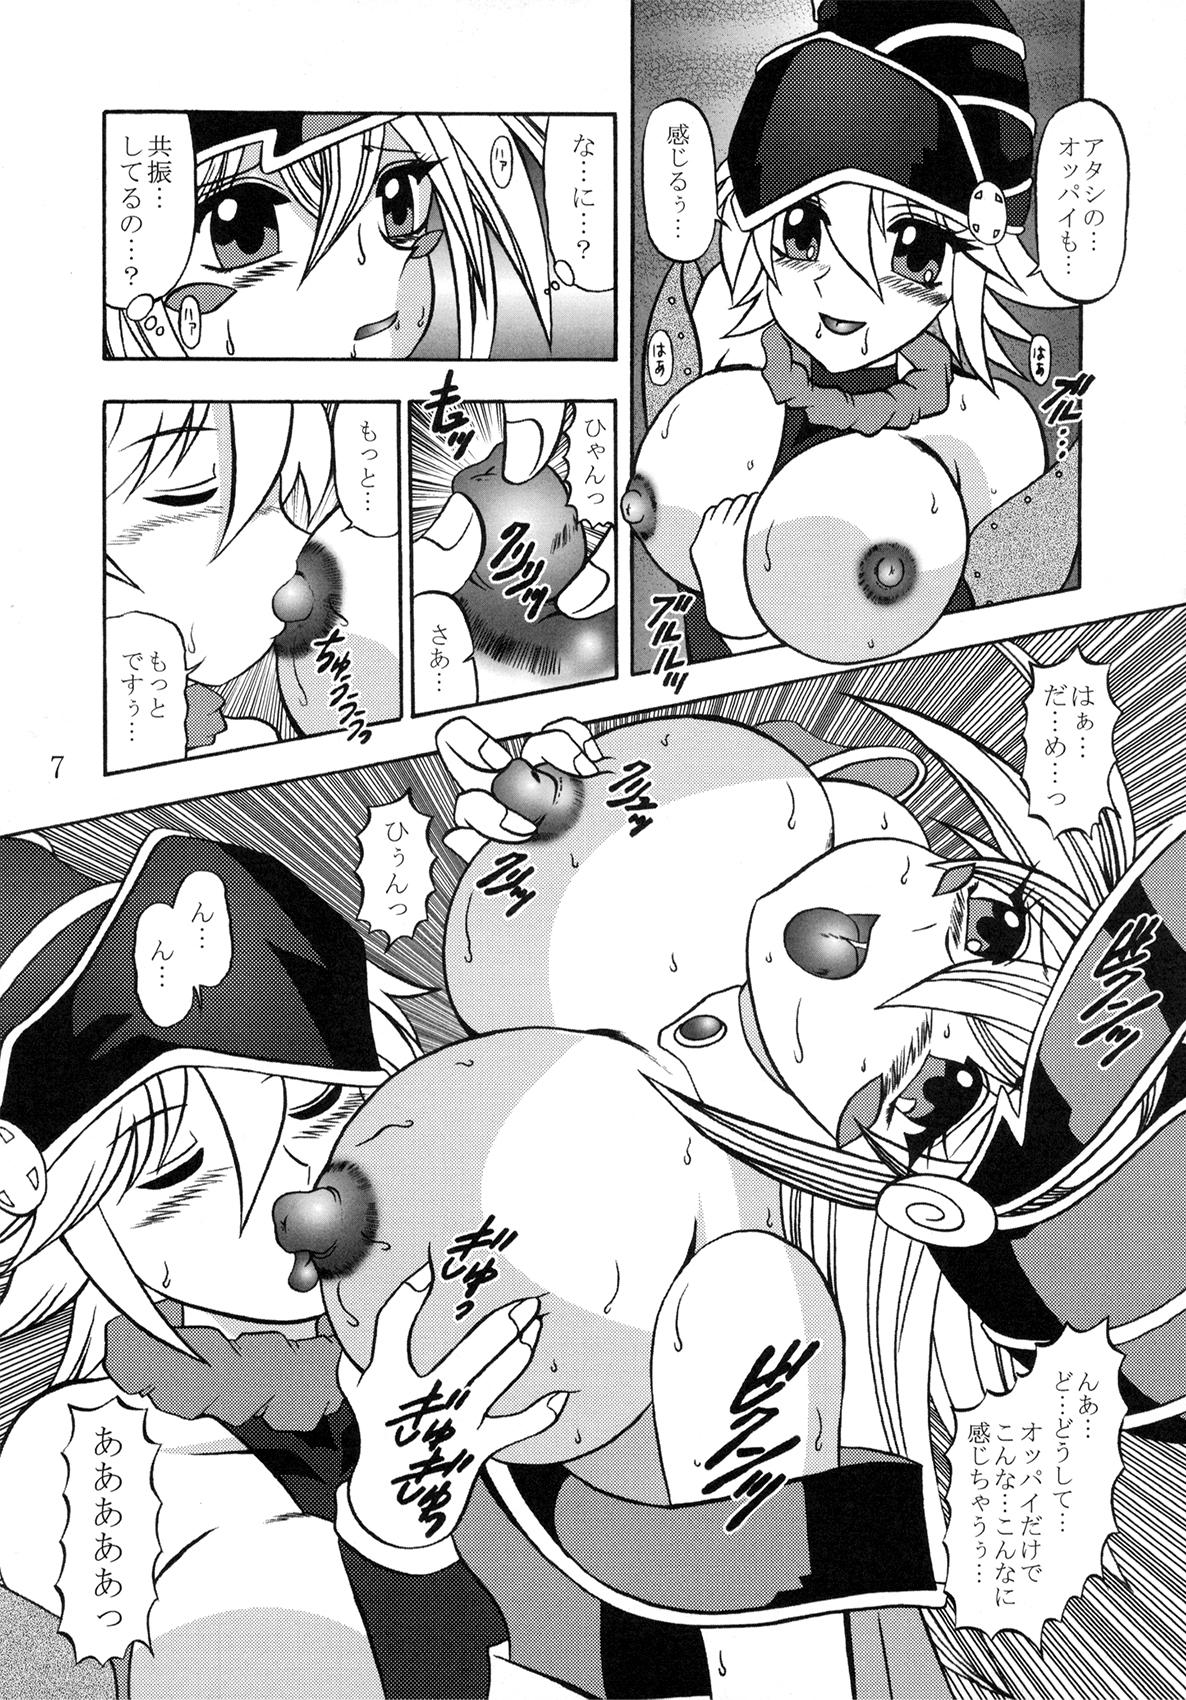 Girlfriend Order of Chaos - Yu-gi-oh Penis Sucking - Page 7